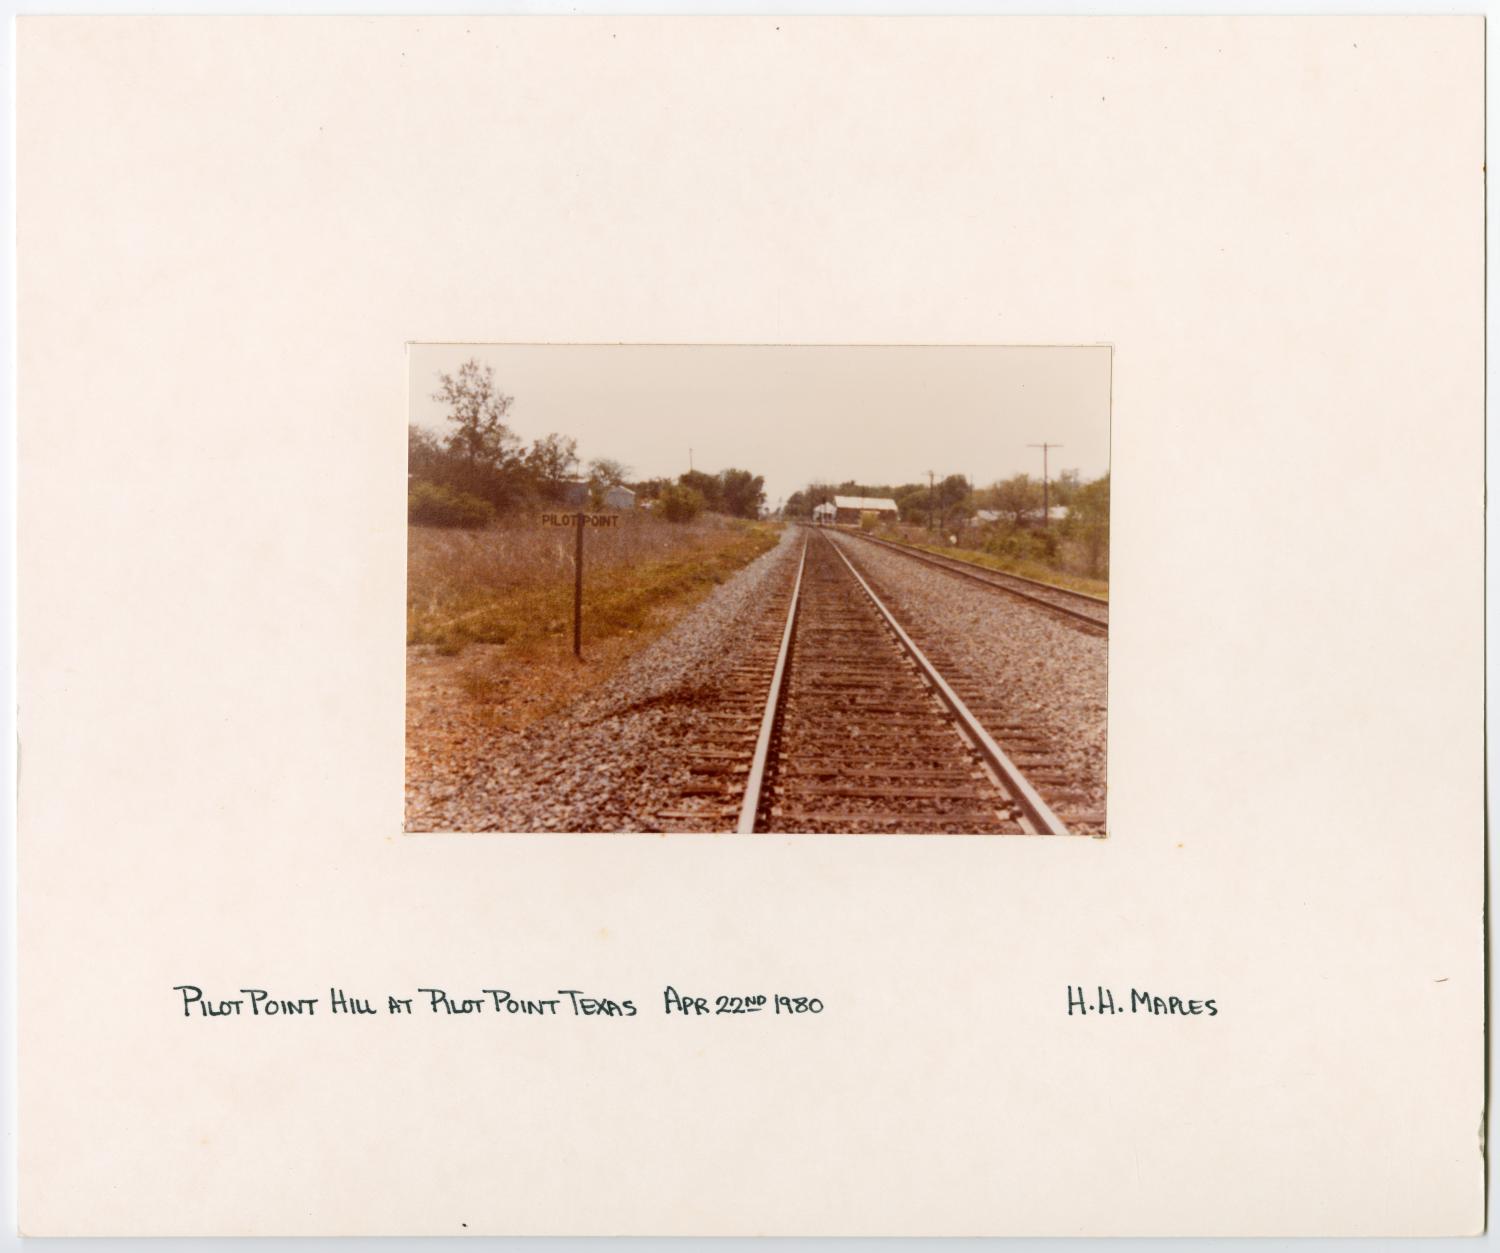 Images of Texas & Pacific Stations and Structures in  Pilot Point, TX